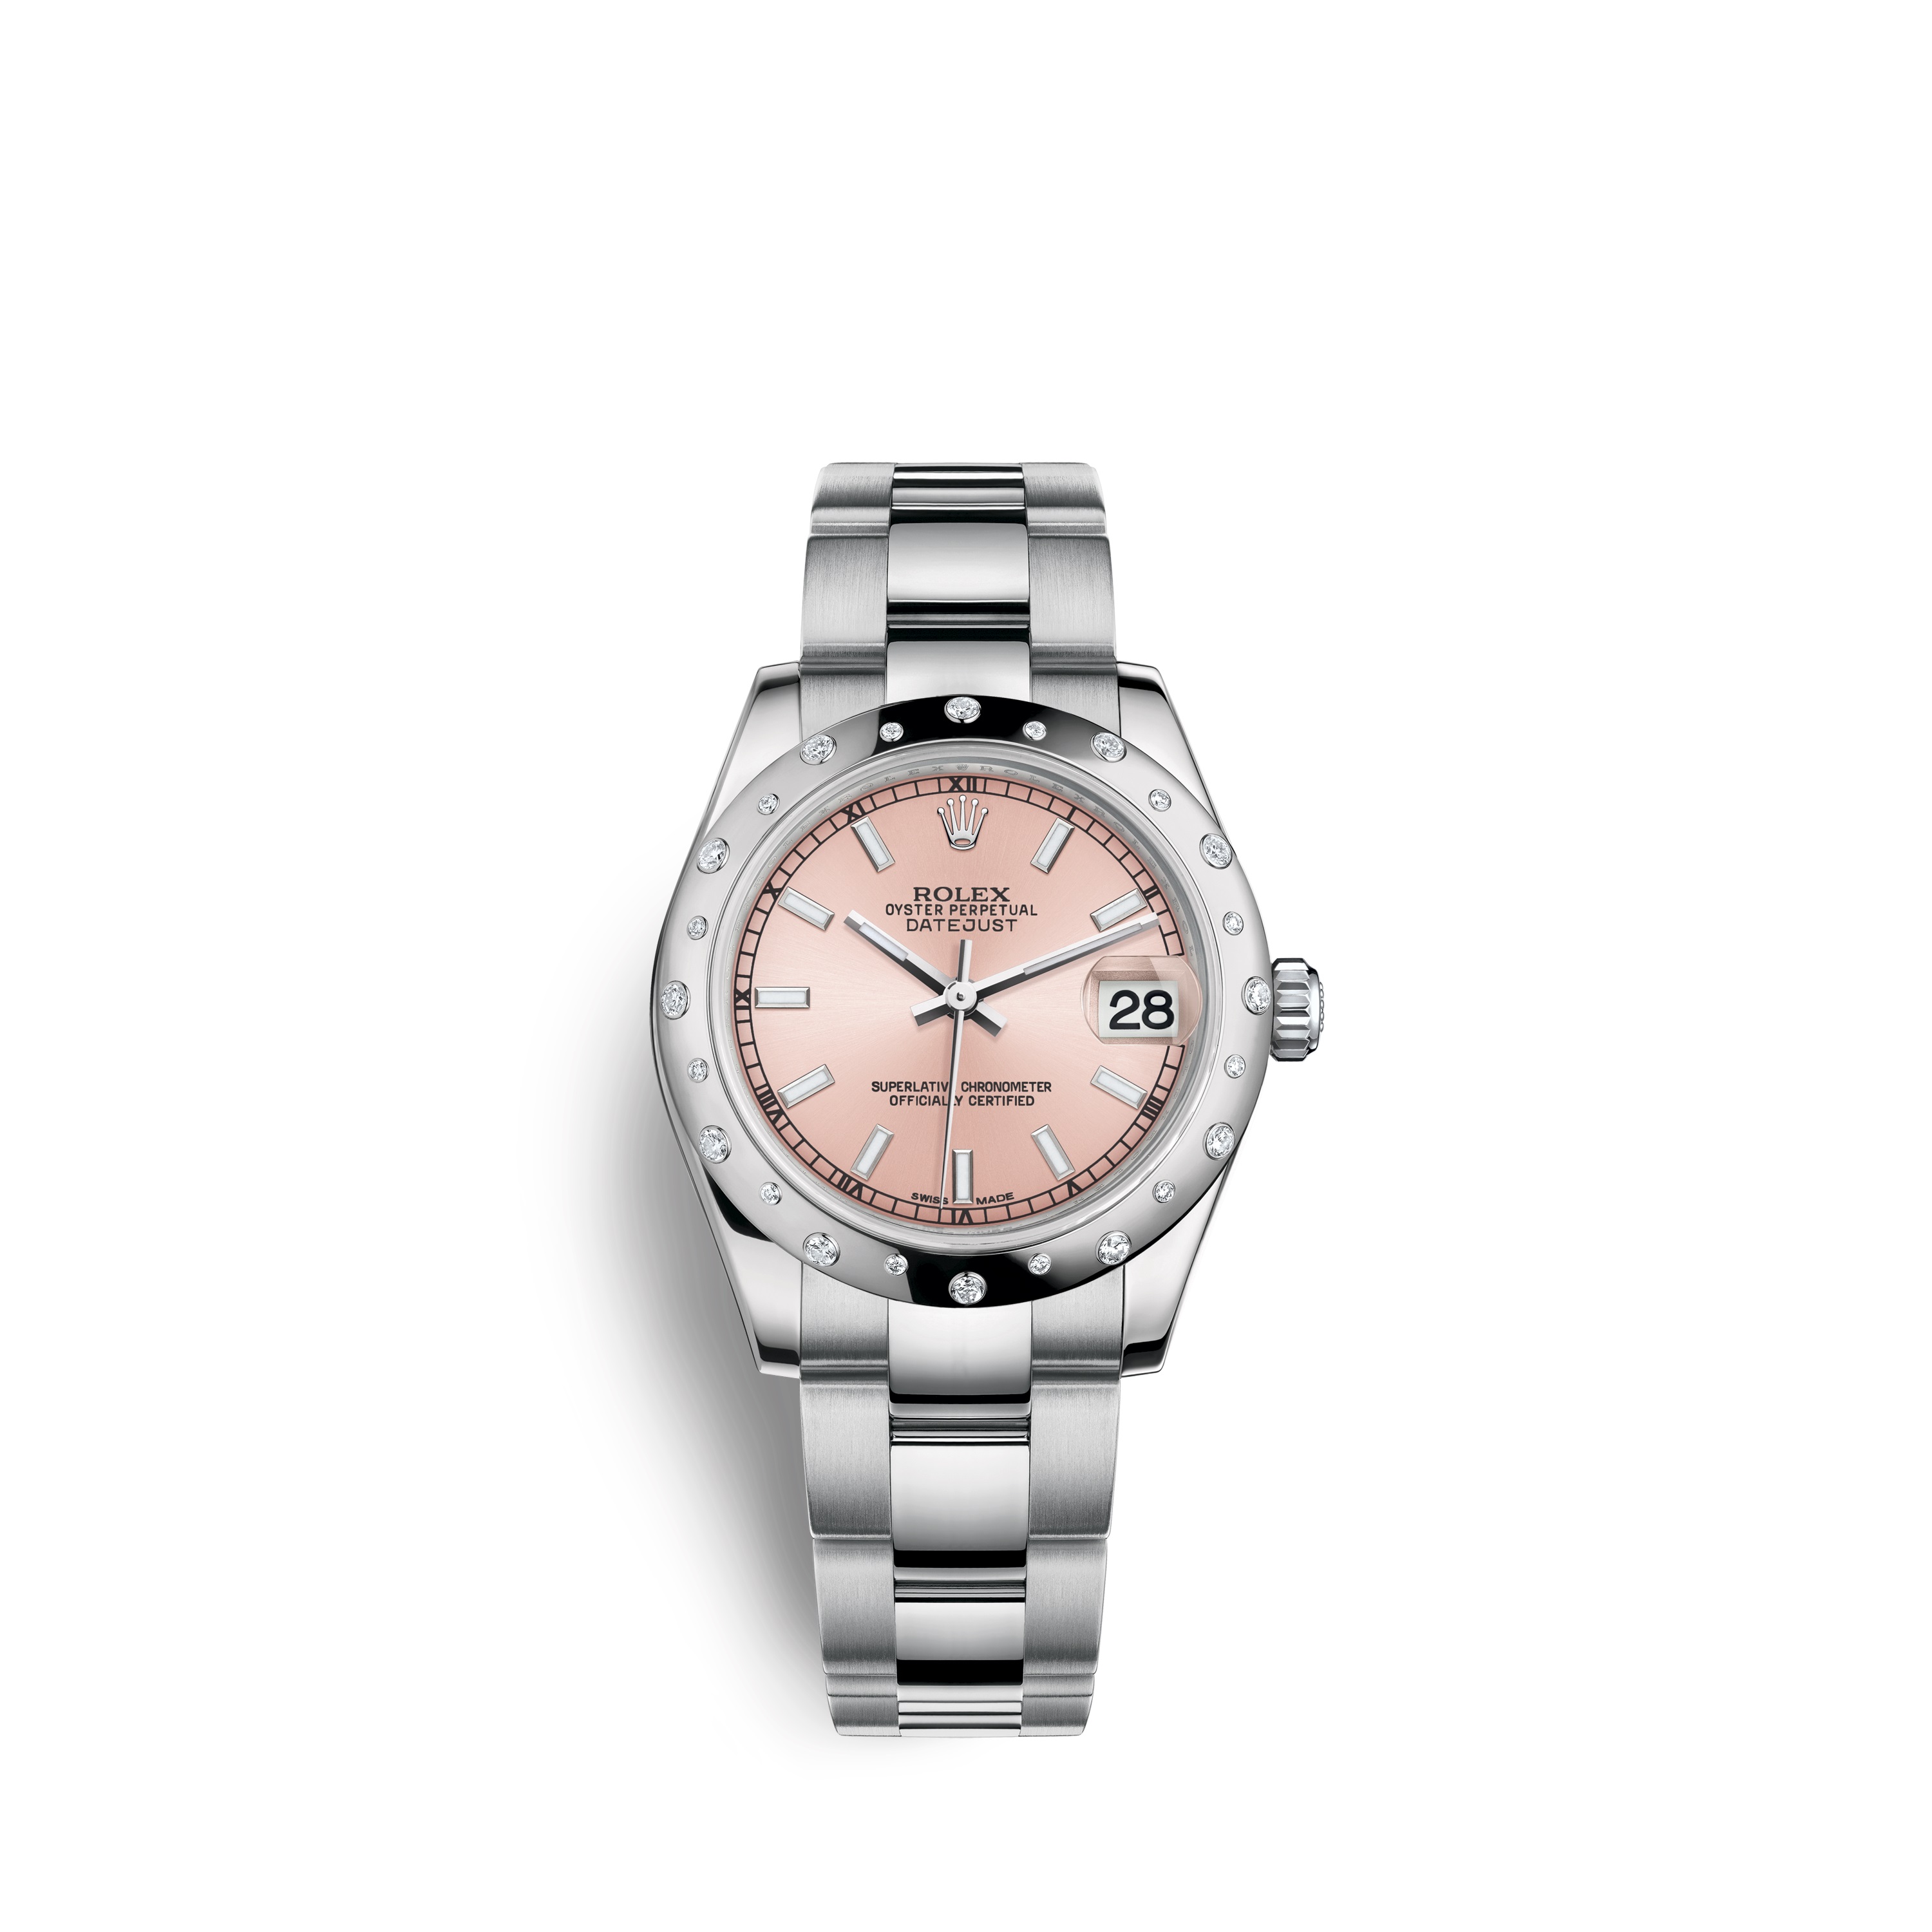 Datejust 31 178344 White Gold & Stainless Steel Watch (Pink)